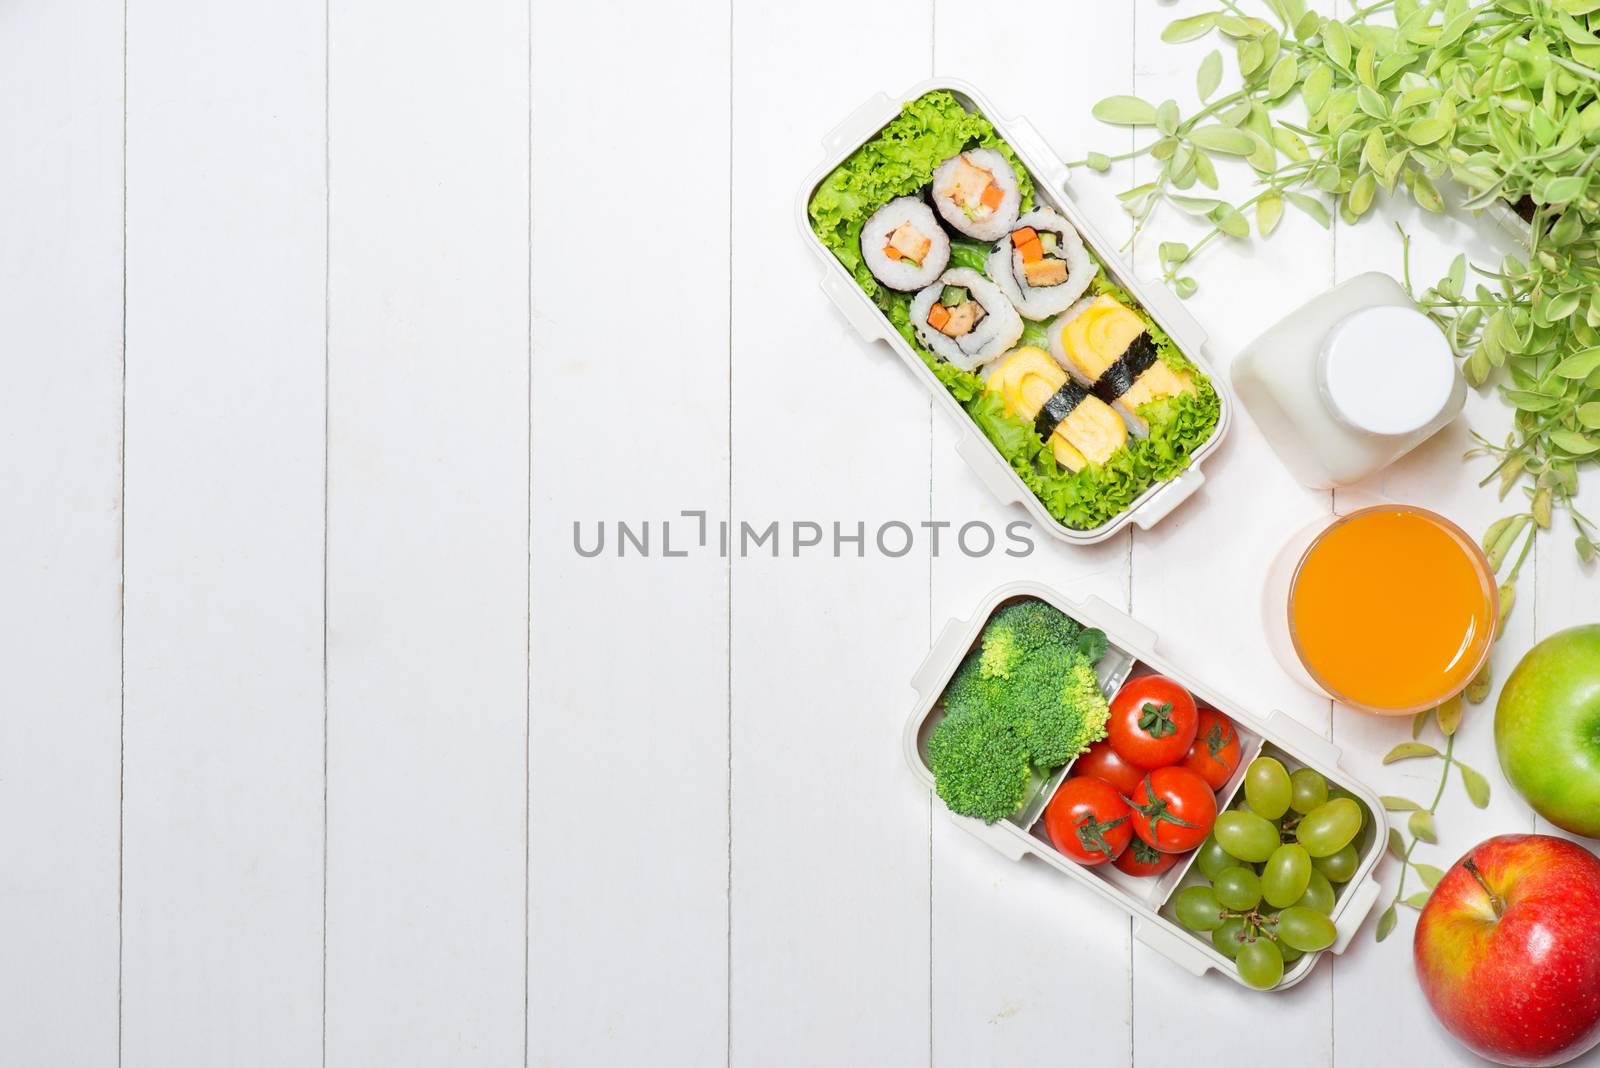 Bento box with different food, fresh veggies and fruits by makidotvn